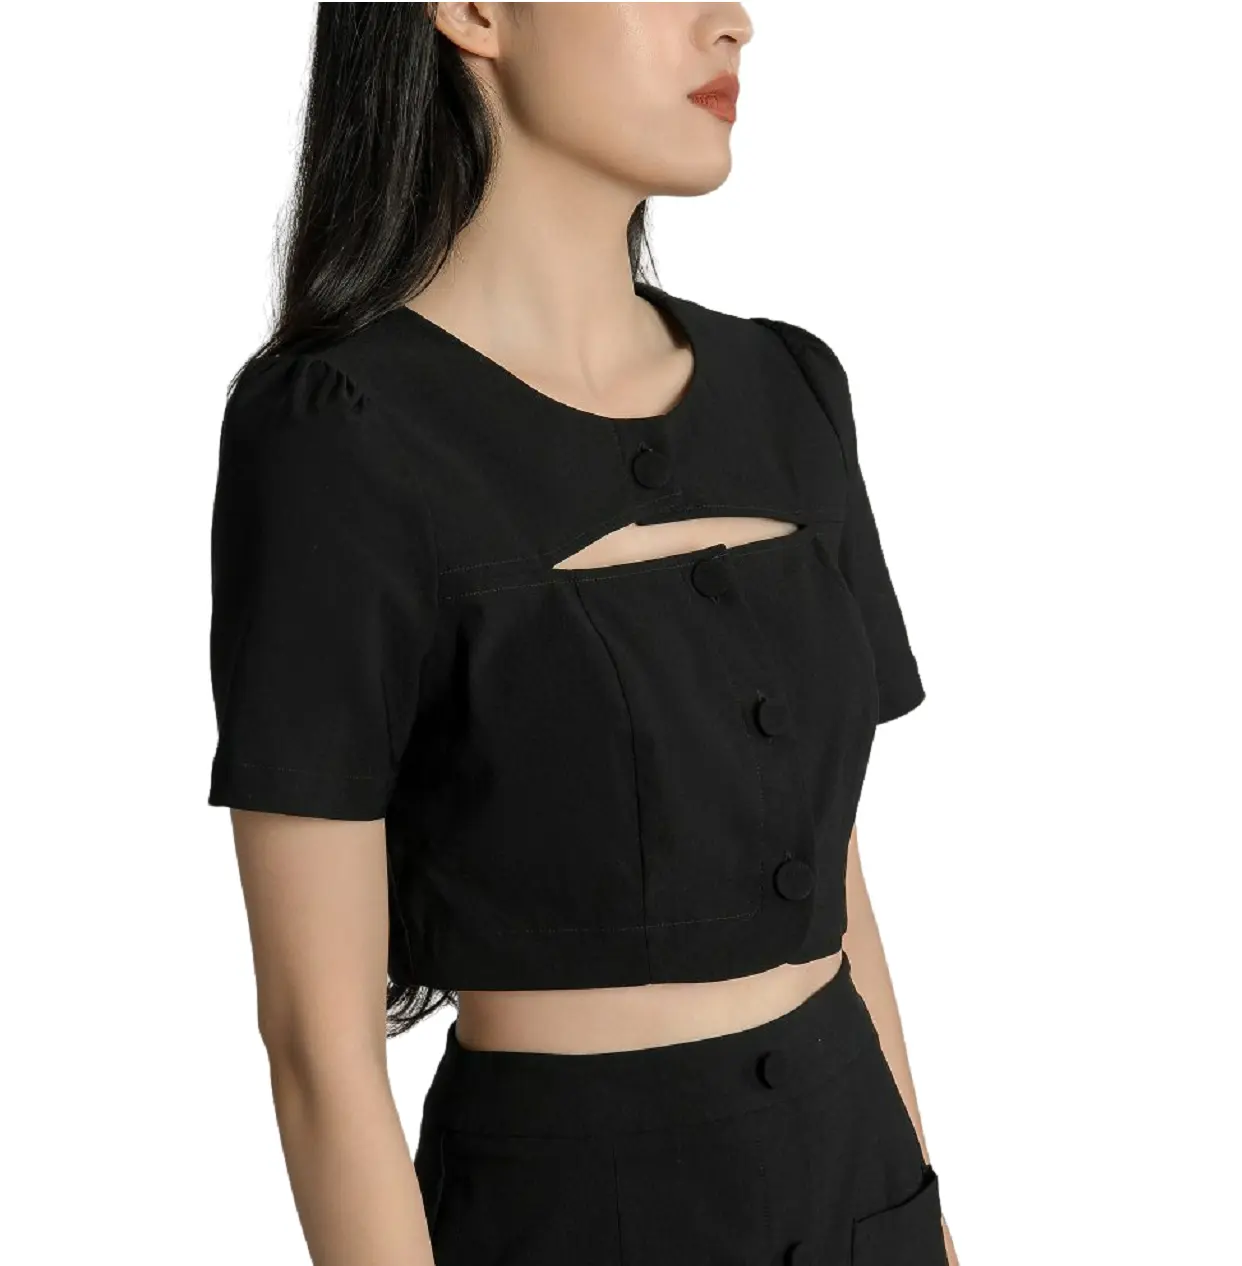 WHOLESALE WOMEN'S CUSTOMIZED LOGO FRONT CUT OUT SELF COVERED BUTTON SHORT SLEEVE CROPPED TOP